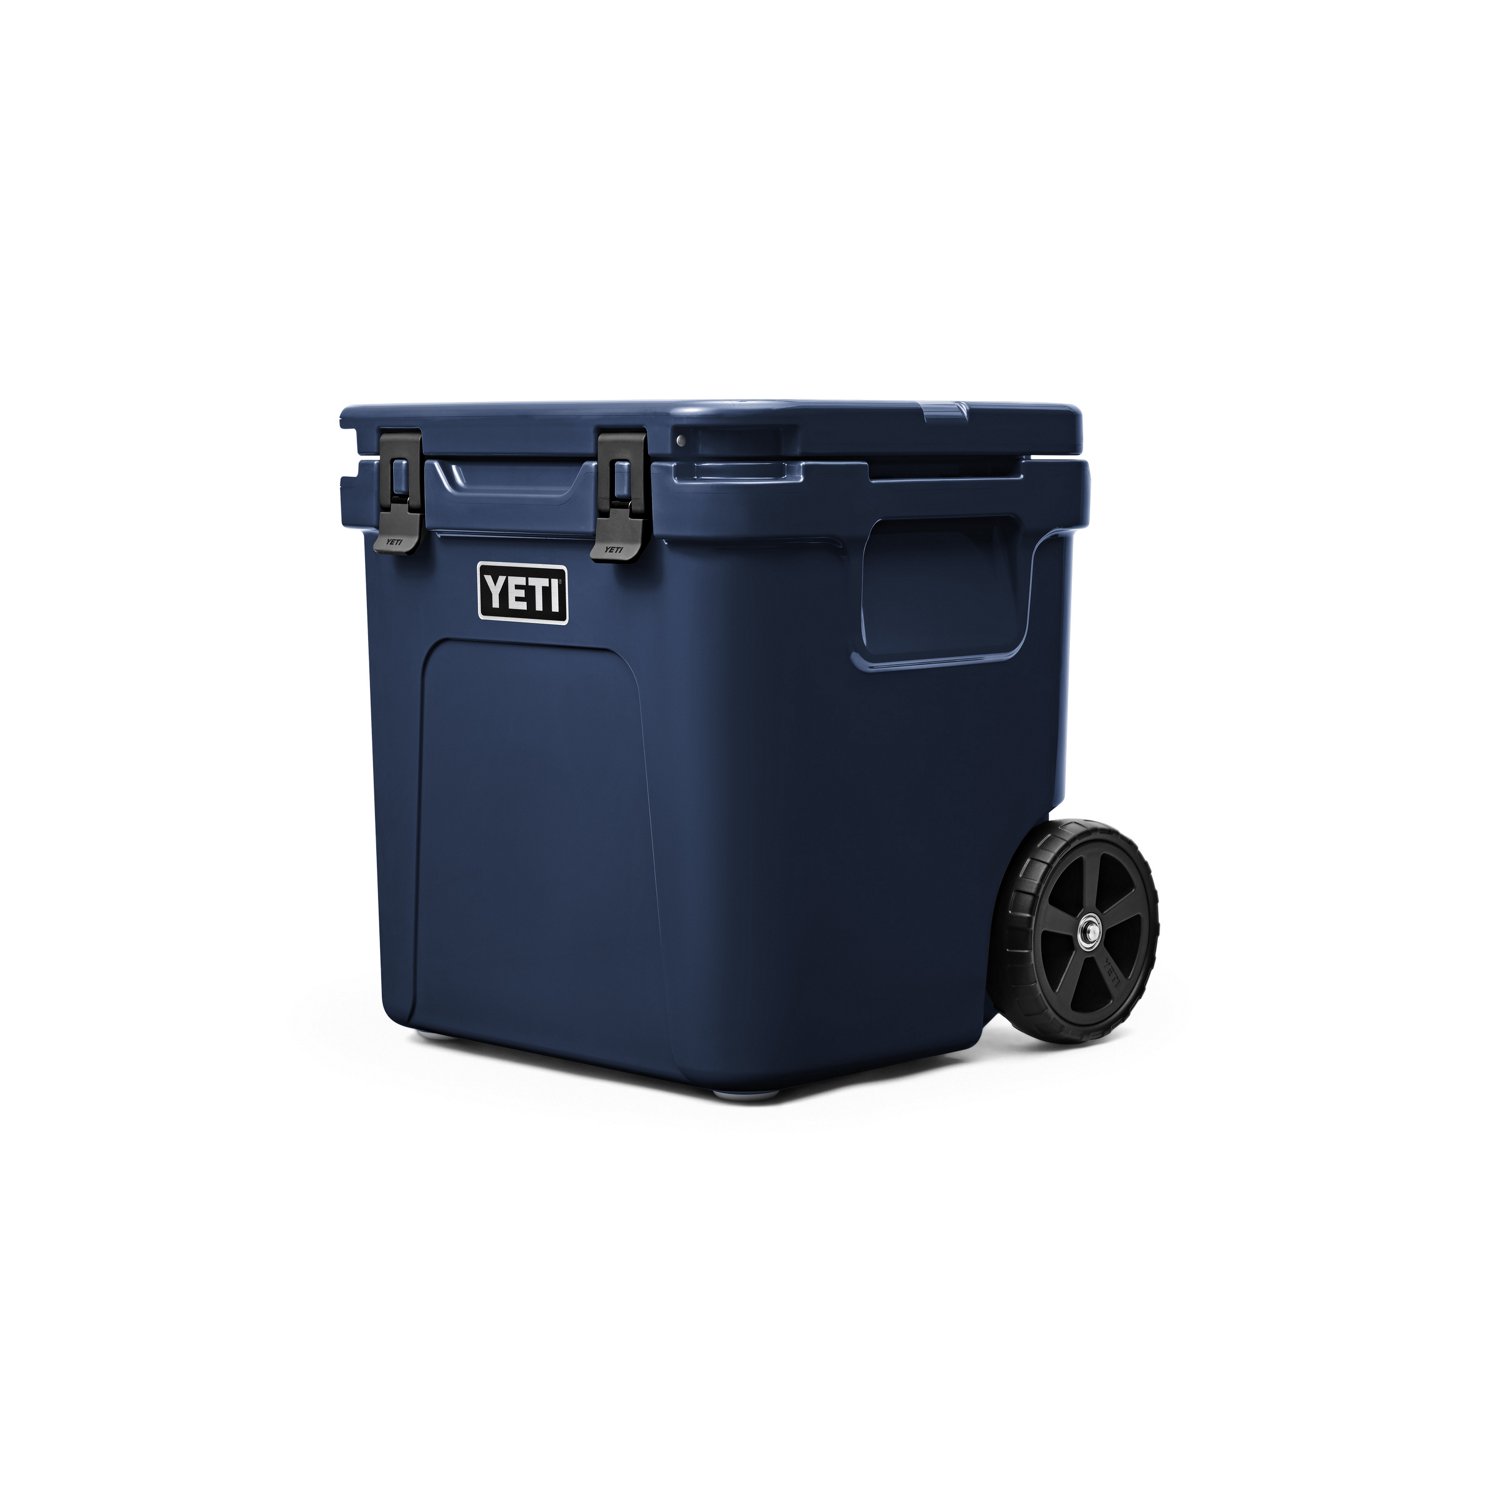 https://academy.scene7.com/is/image/academy///camping/coolers/blue_yeti-roadie-48-wheeled-cooler_10048200000/19c35bab1596401fbefba449dcbcc854